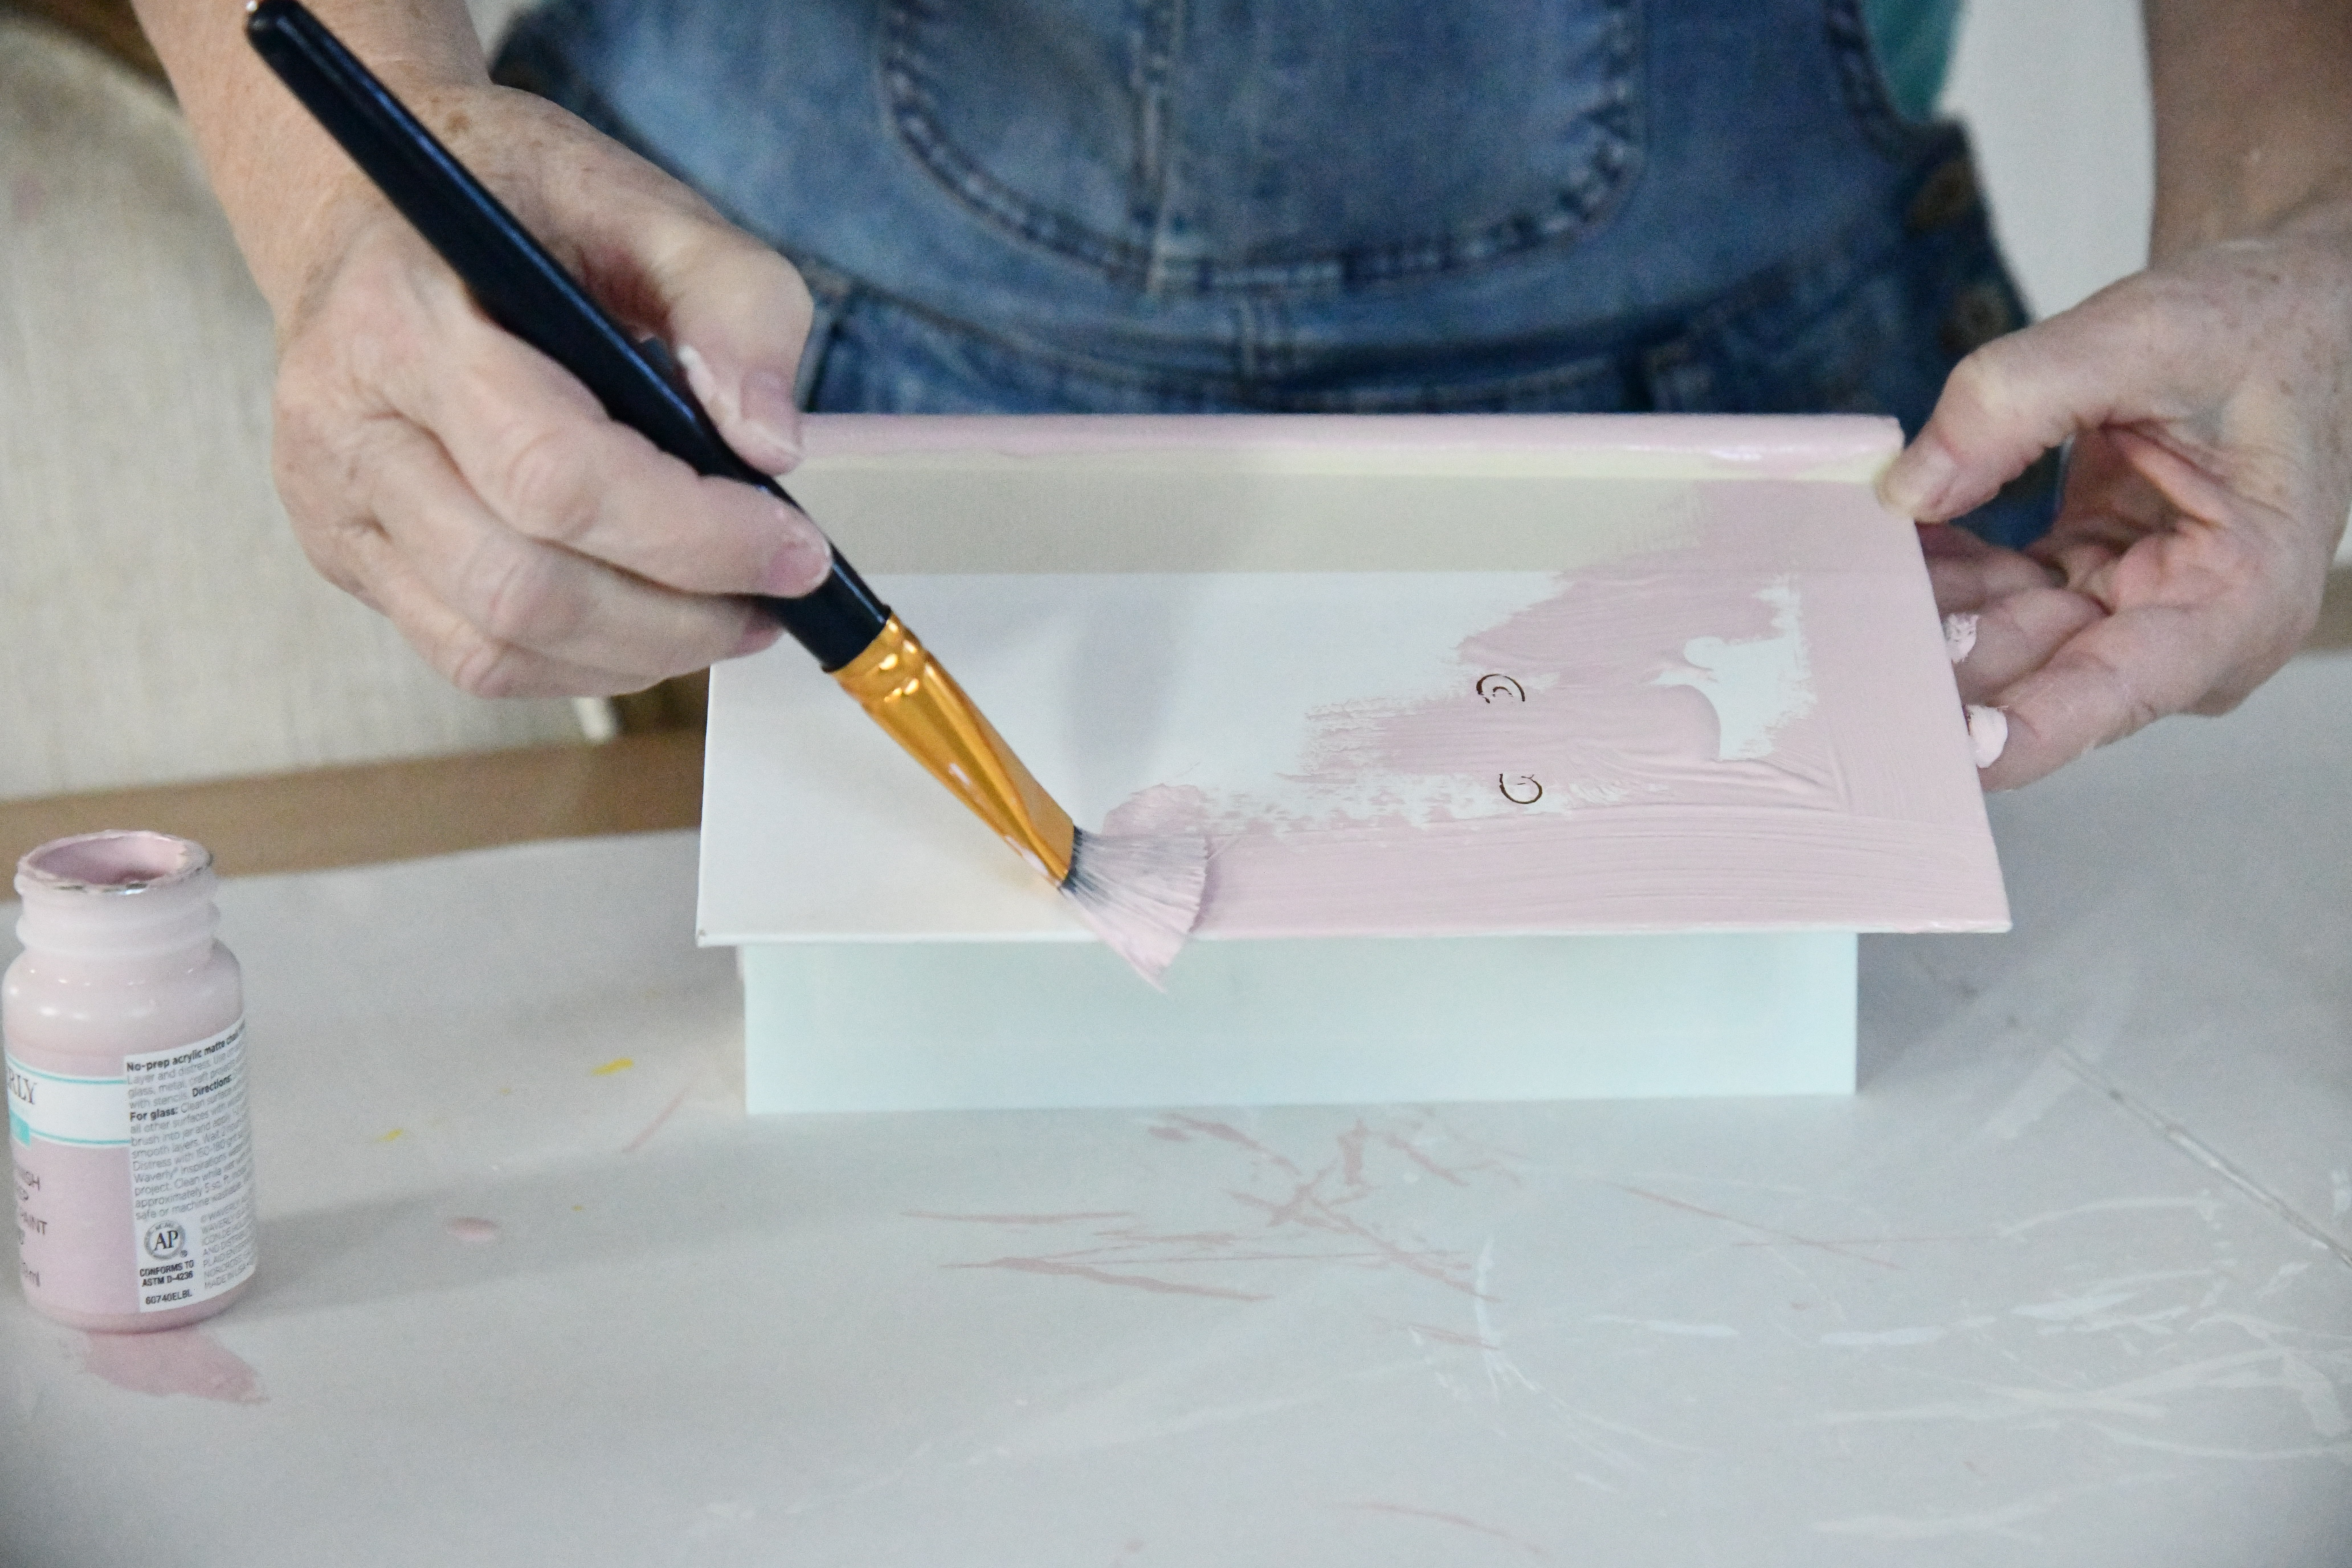 painting a book pink for valentines day DIY decor